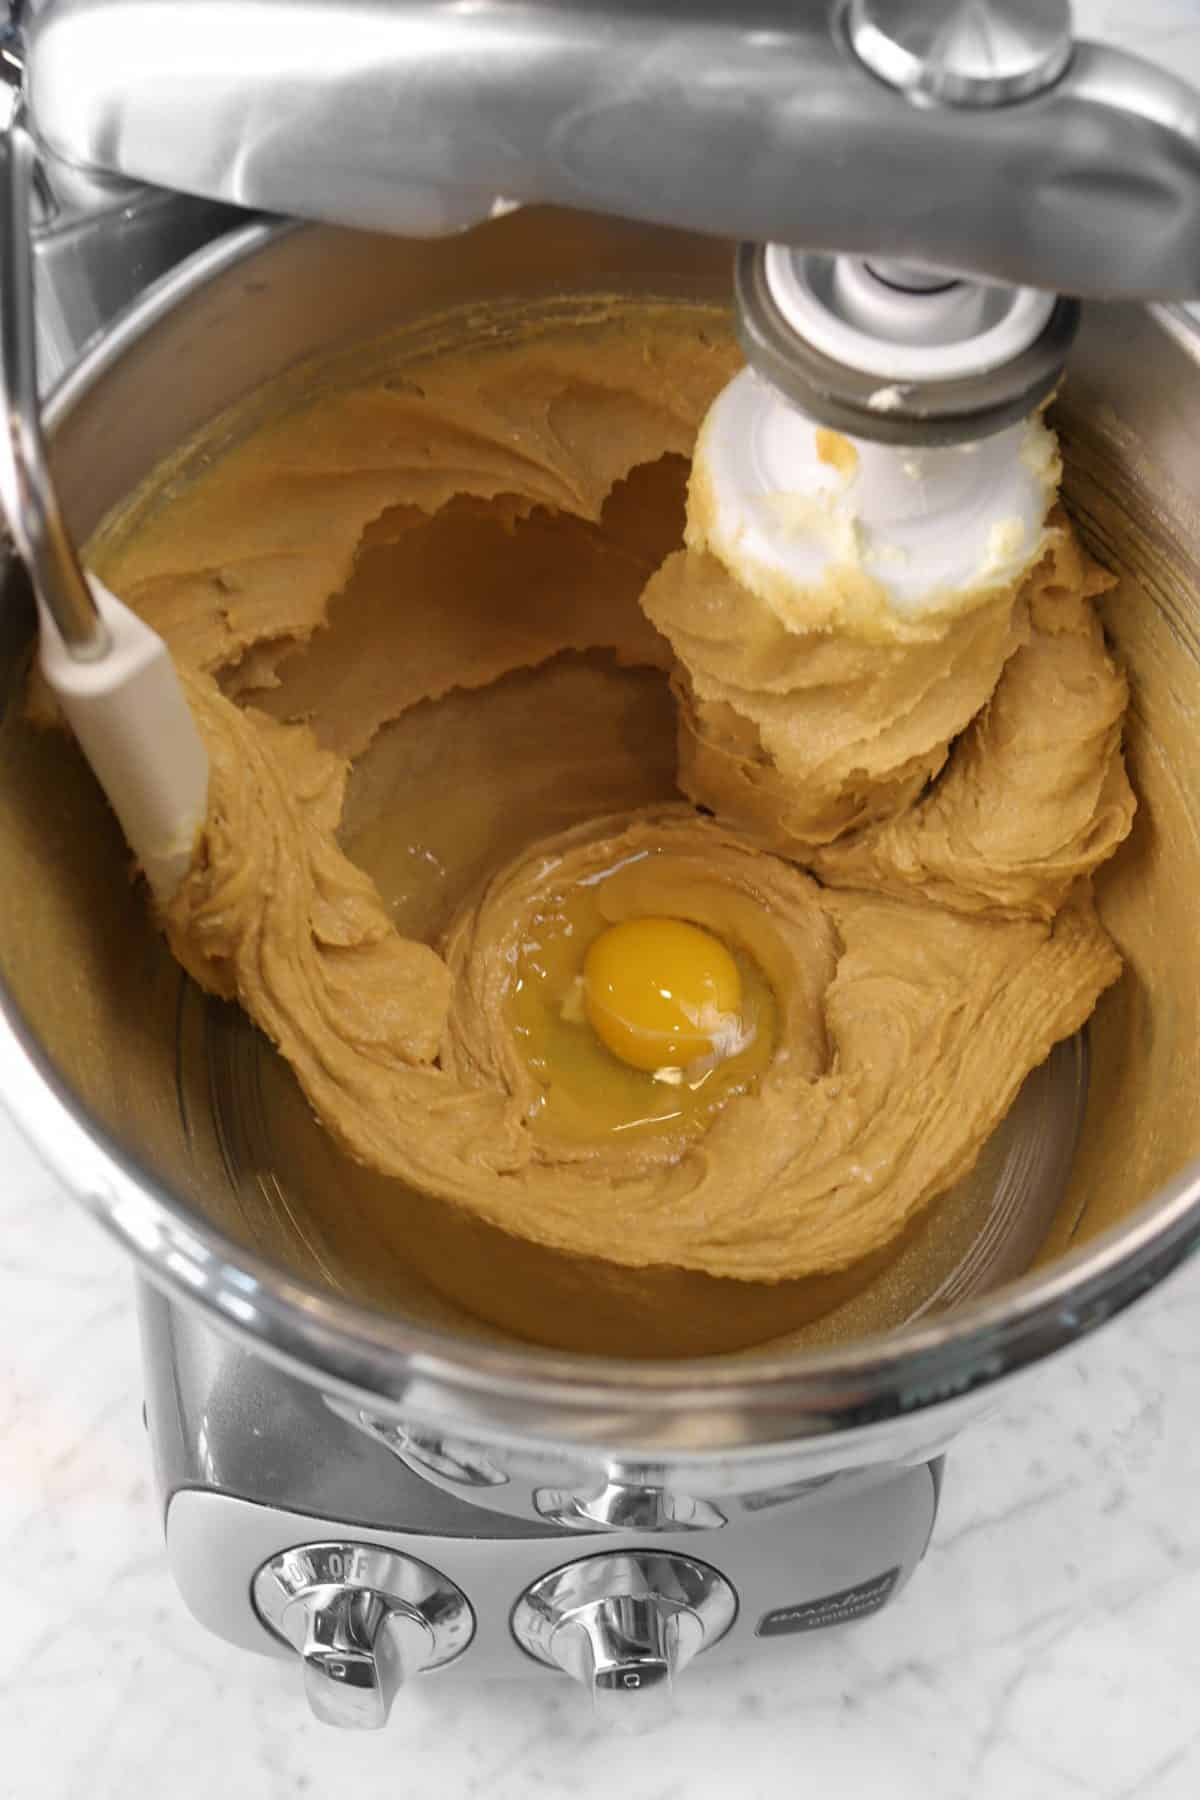 egg added to peanut butter mixture in a mixing bowl